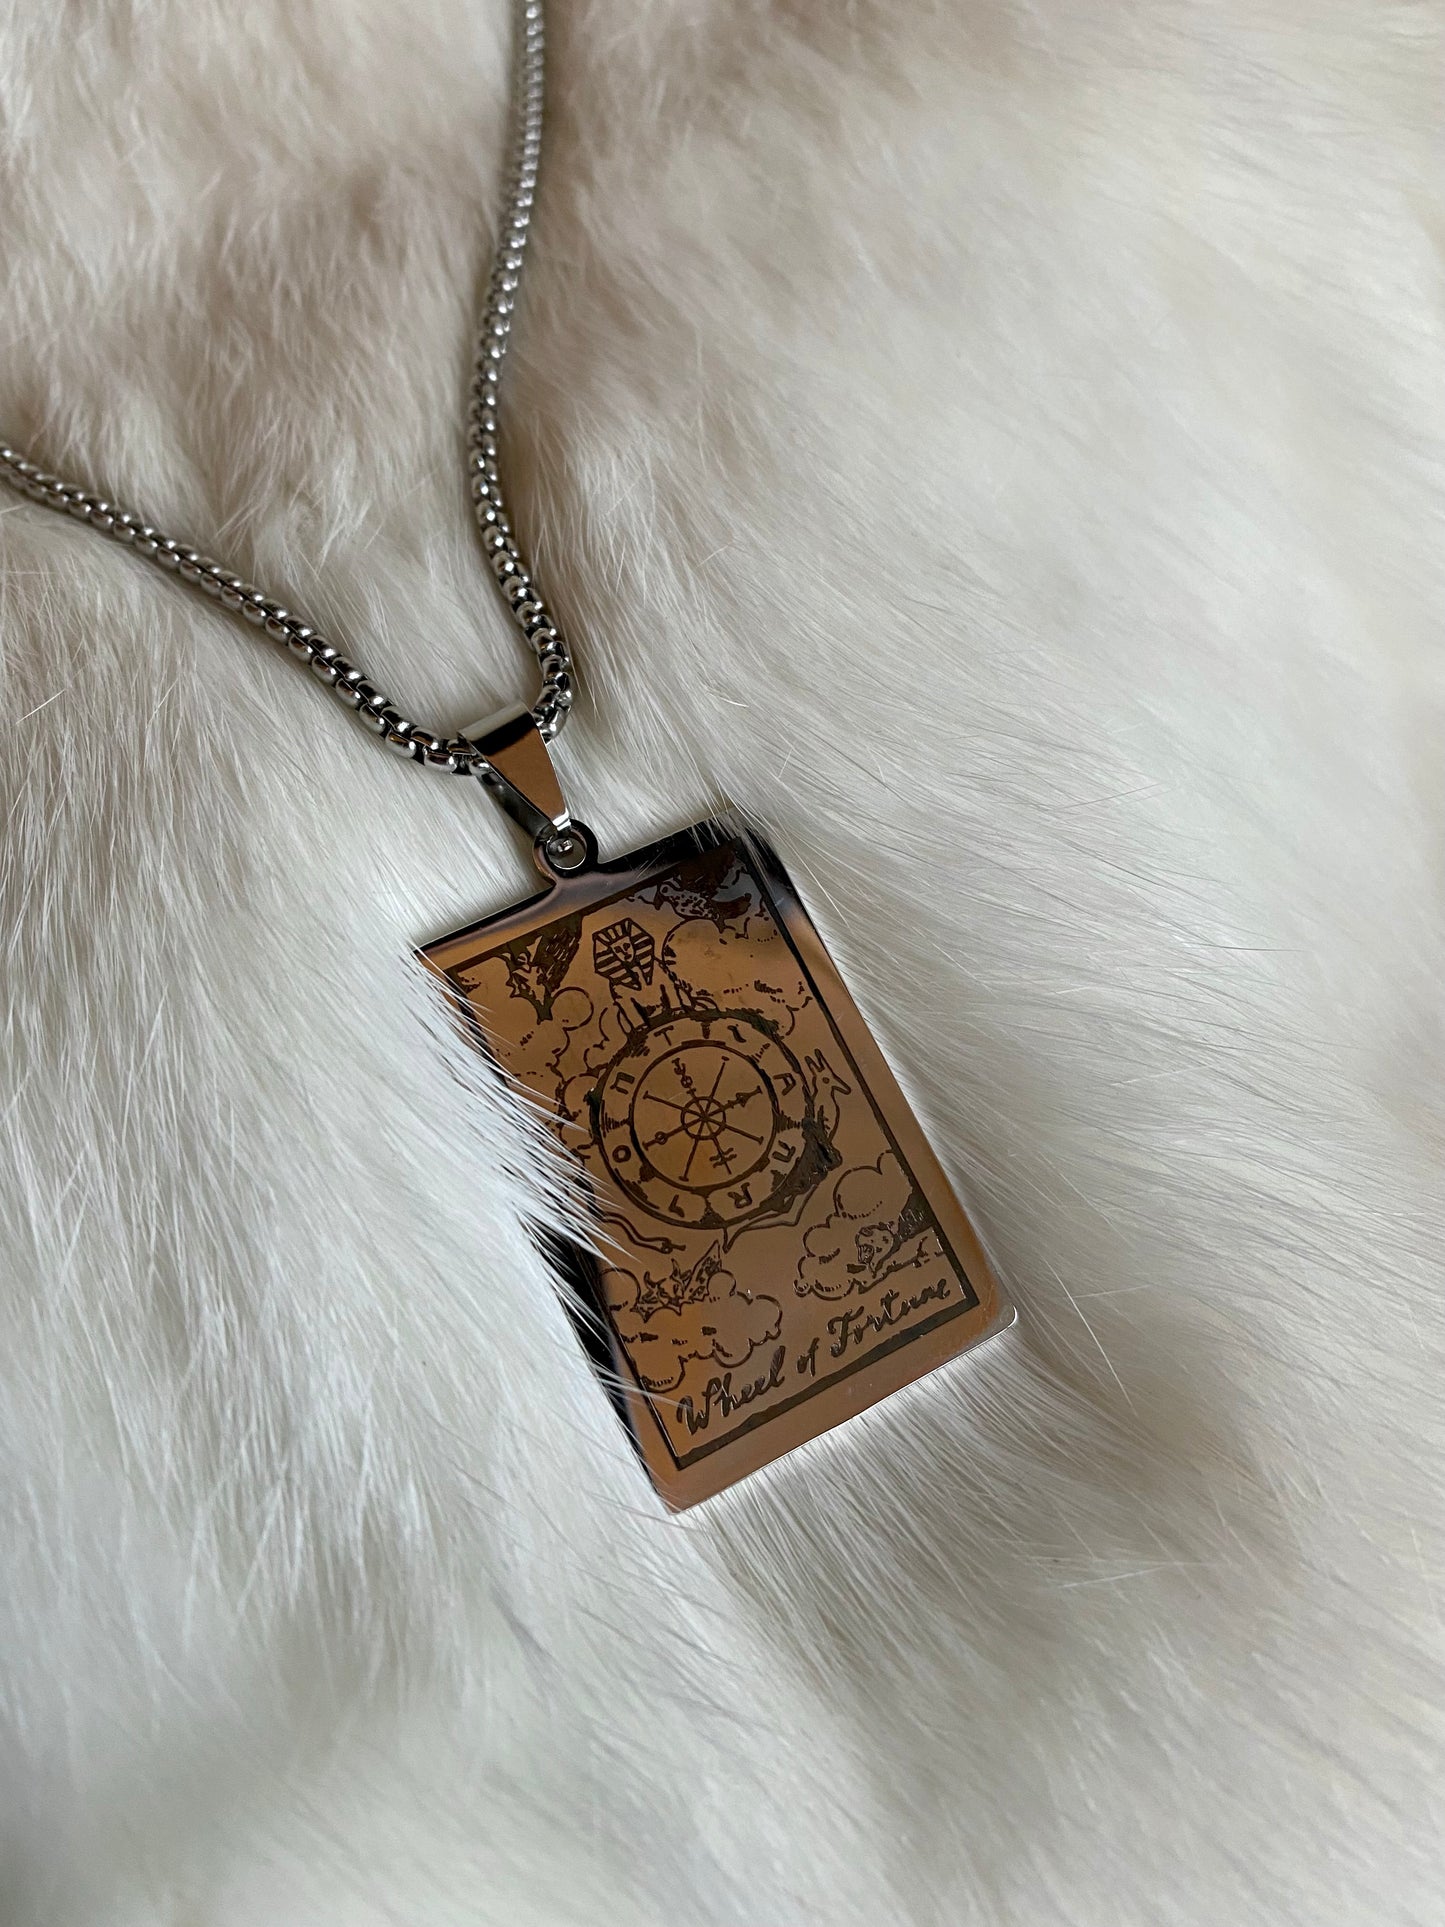 “Wheel of Fortune” Tarot Card Necklace